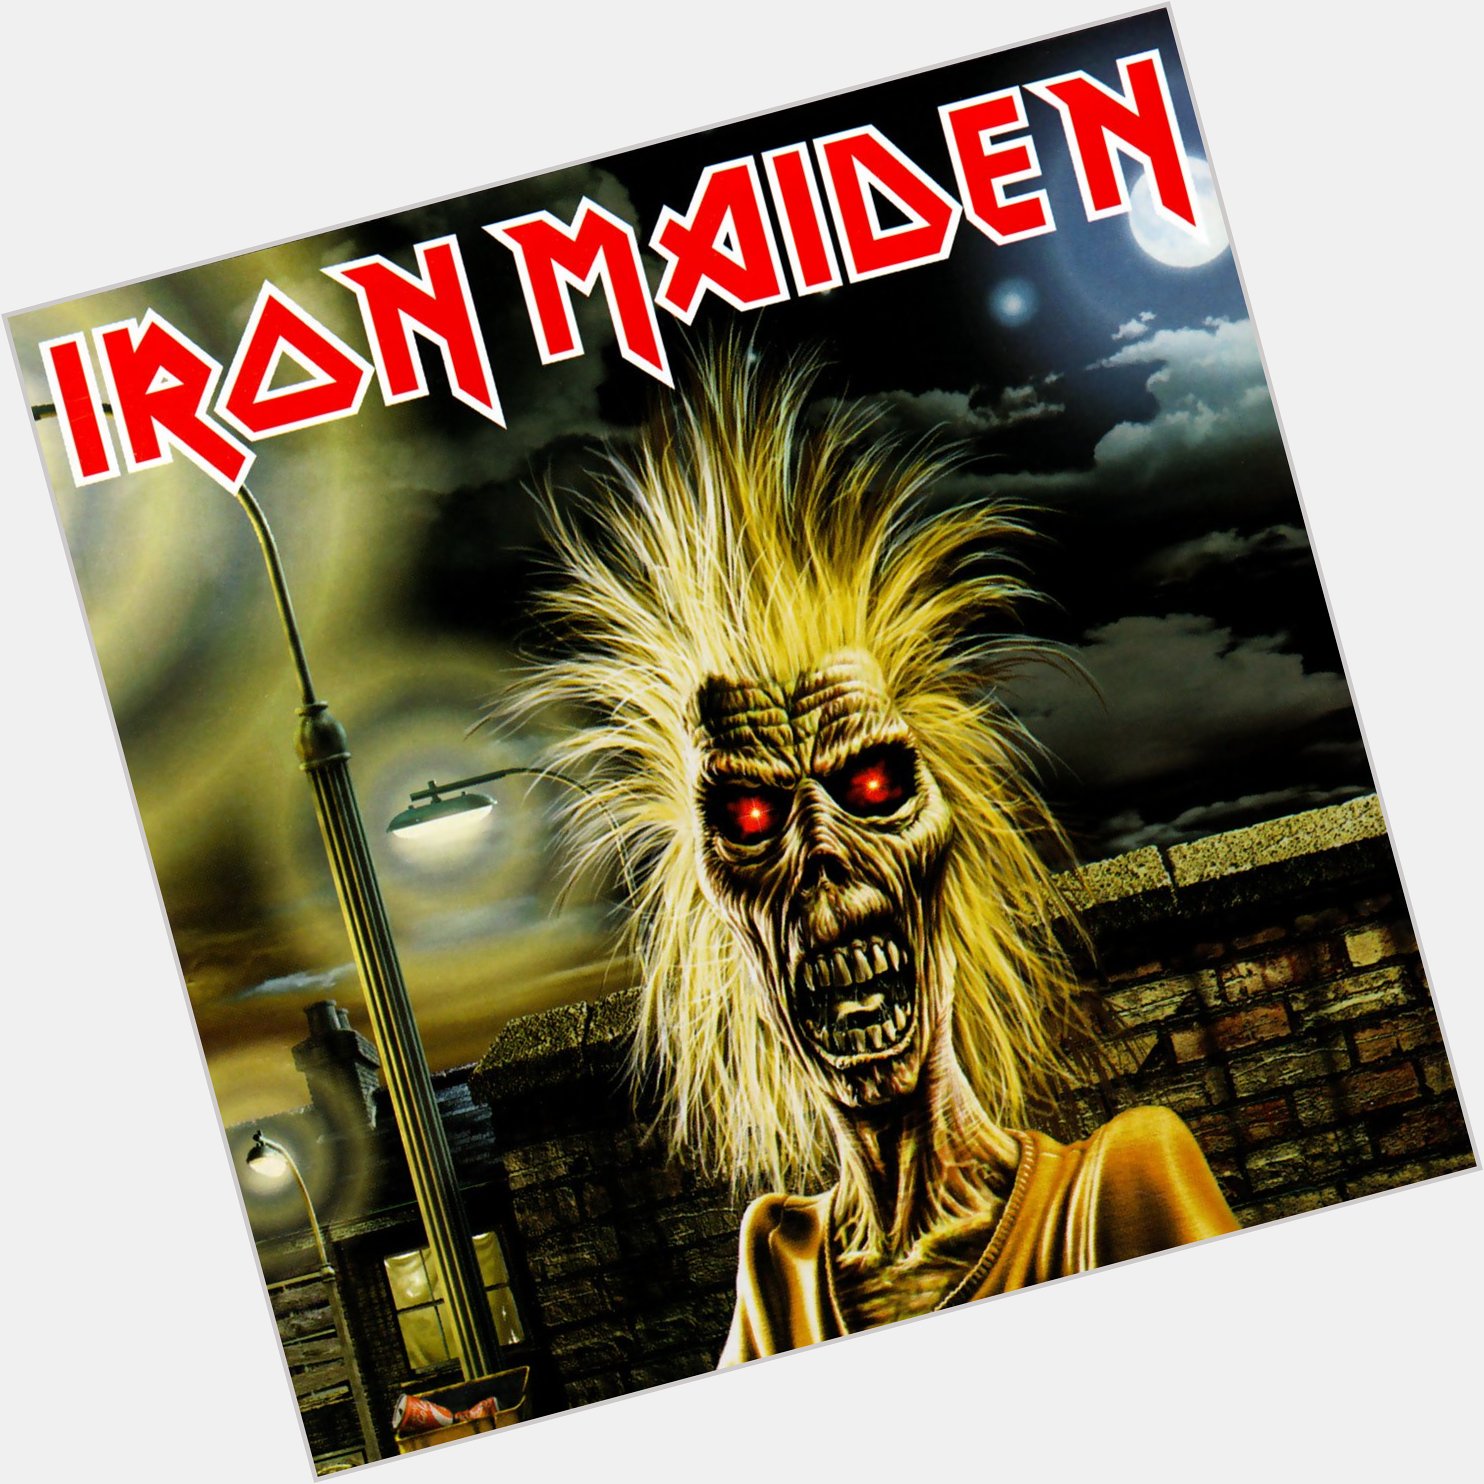  Phantom Of The Opera
from Iron Maiden
by Iron Maiden

Happy Birthday, Clive Burr! 